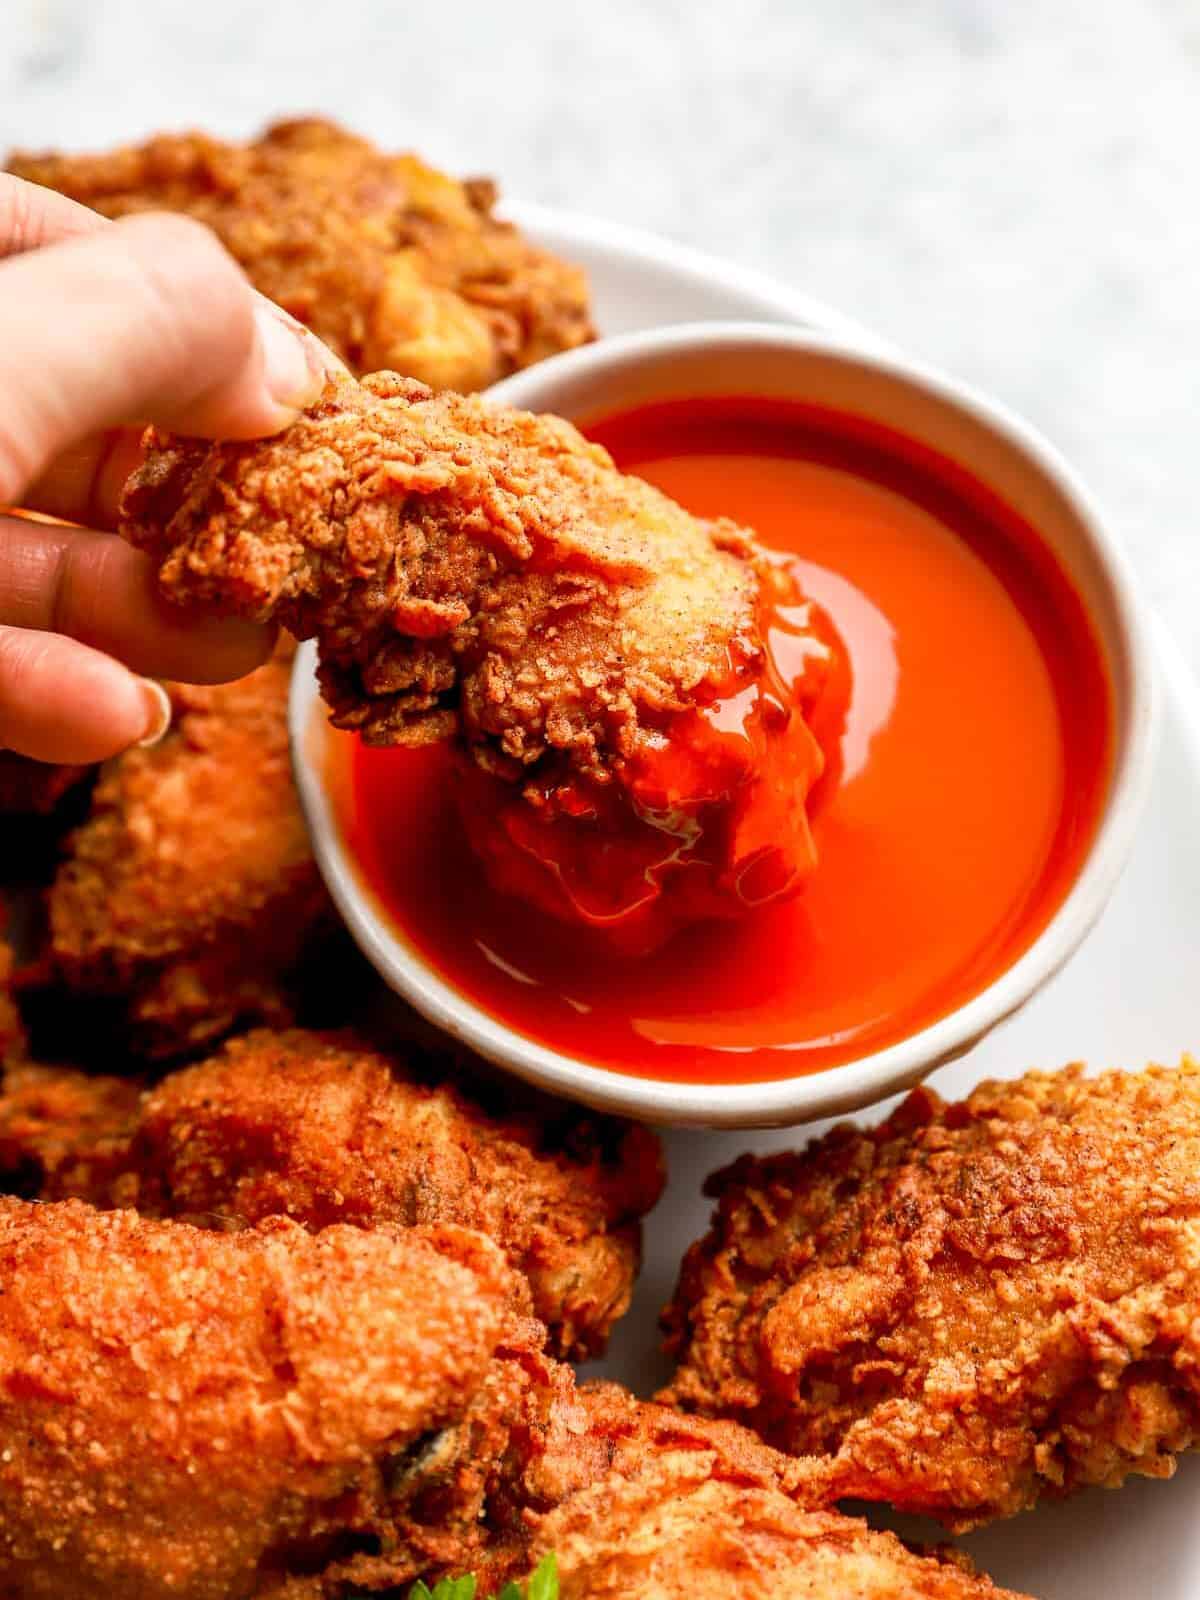 a hand dipping a fried chicken wing into a bowl of buffalo sauce.